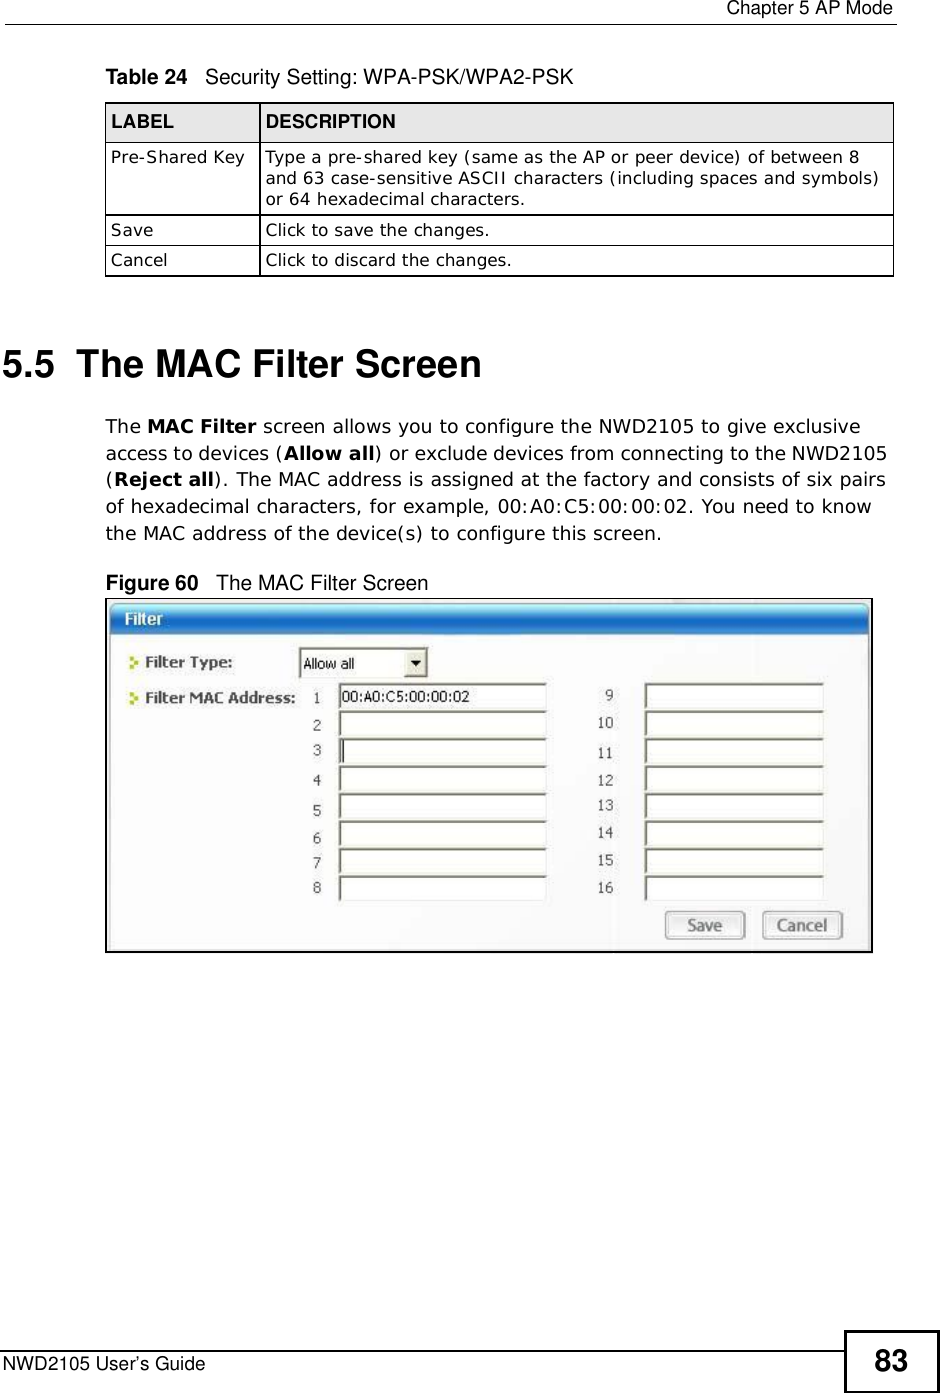  Chapter 5AP ModeNWD2105 User’s Guide 835.5  The MAC Filter ScreenThe MAC Filter screen allows you to configure the NWD2105 to give exclusive access to devices (Allow all) or exclude devices from connecting to the NWD2105 (Reject all). The MAC address is assigned at the factory and consists of six pairs of hexadecimal characters, for example, 00:A0:C5:00:00:02. You need to know the MAC address of the device(s) to configure this screen.Figure 60   The MAC Filter Screen Pre-Shared KeyType a pre-shared key (same as the AP or peer device) of between 8 and 63 case-sensitive ASCII characters (including spaces and symbols) or 64 hexadecimal characters.SaveClickto save the changes.CancelClickto discard the changes.Table 24   Security Setting: WPA-PSK/WPA2-PSKLABEL DESCRIPTION